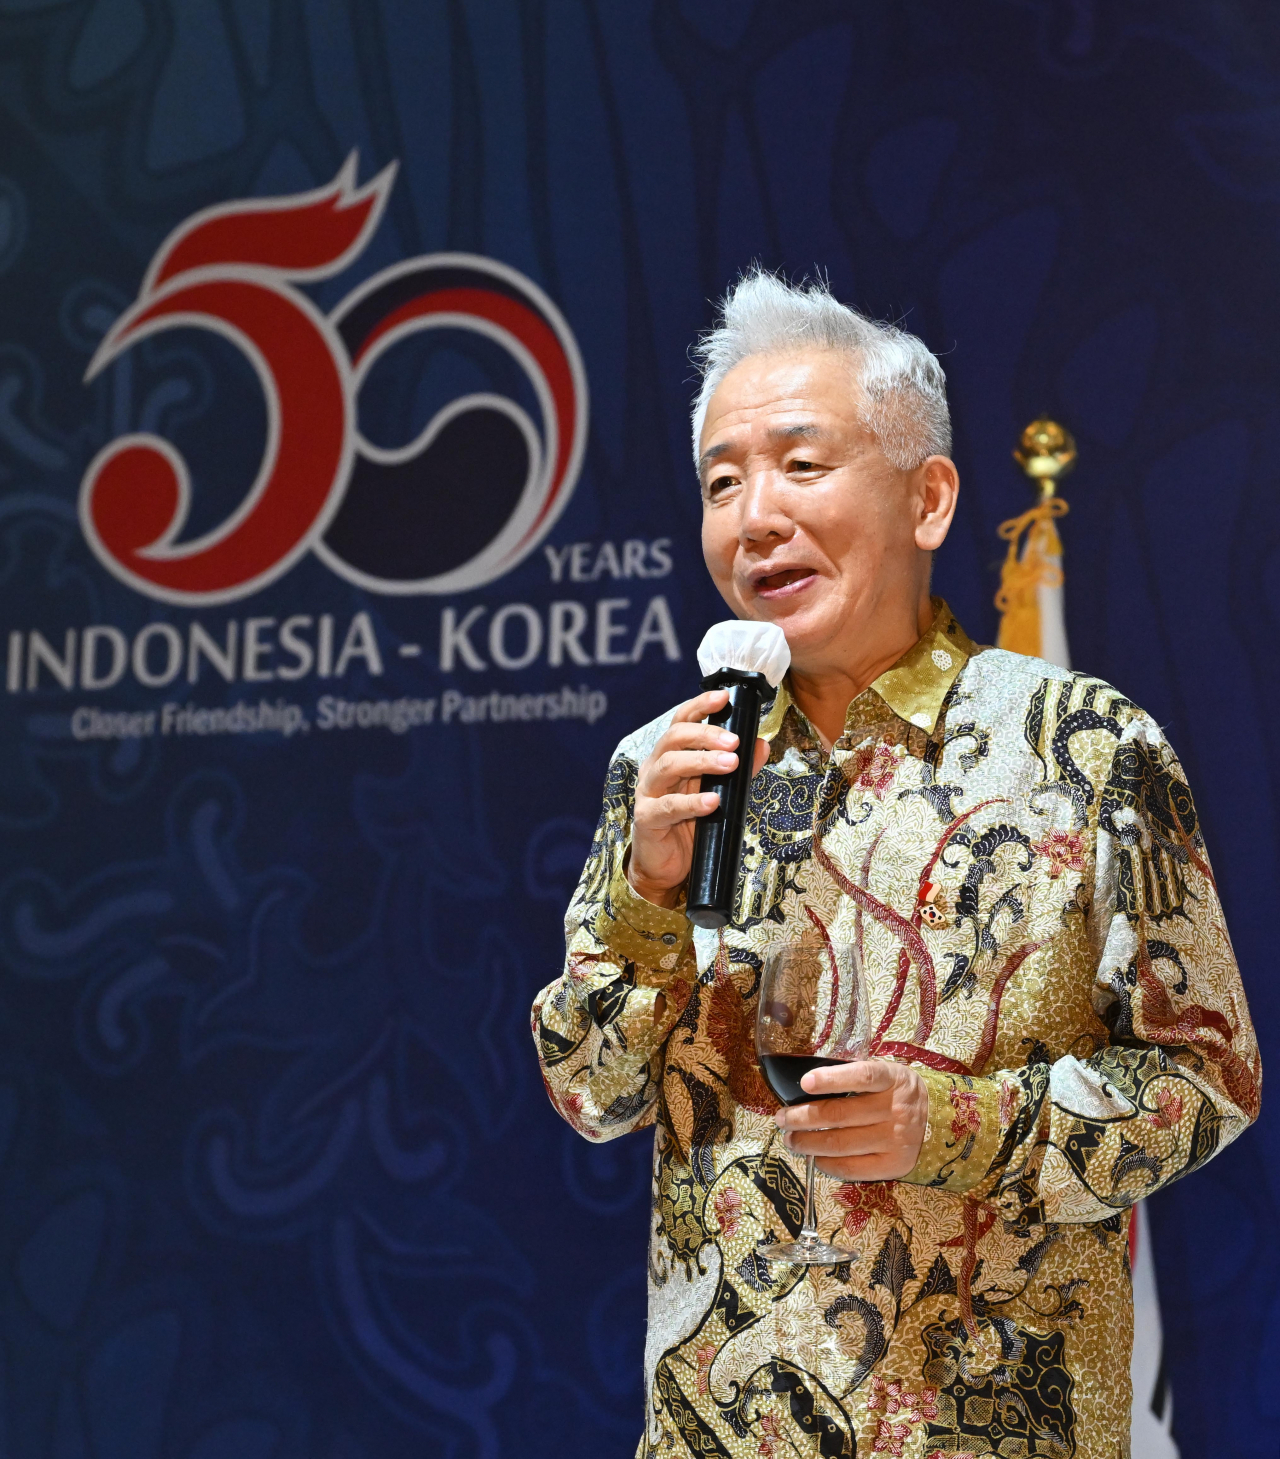 South Korean Ambassador to Indonesia, Lee Sang-deok talks before raising a toast at the Korea-Indonesia Friendship Night event held on Thursday evening at a hotel in Jakarta. (Lee Sang-sub/The Korea Herald)